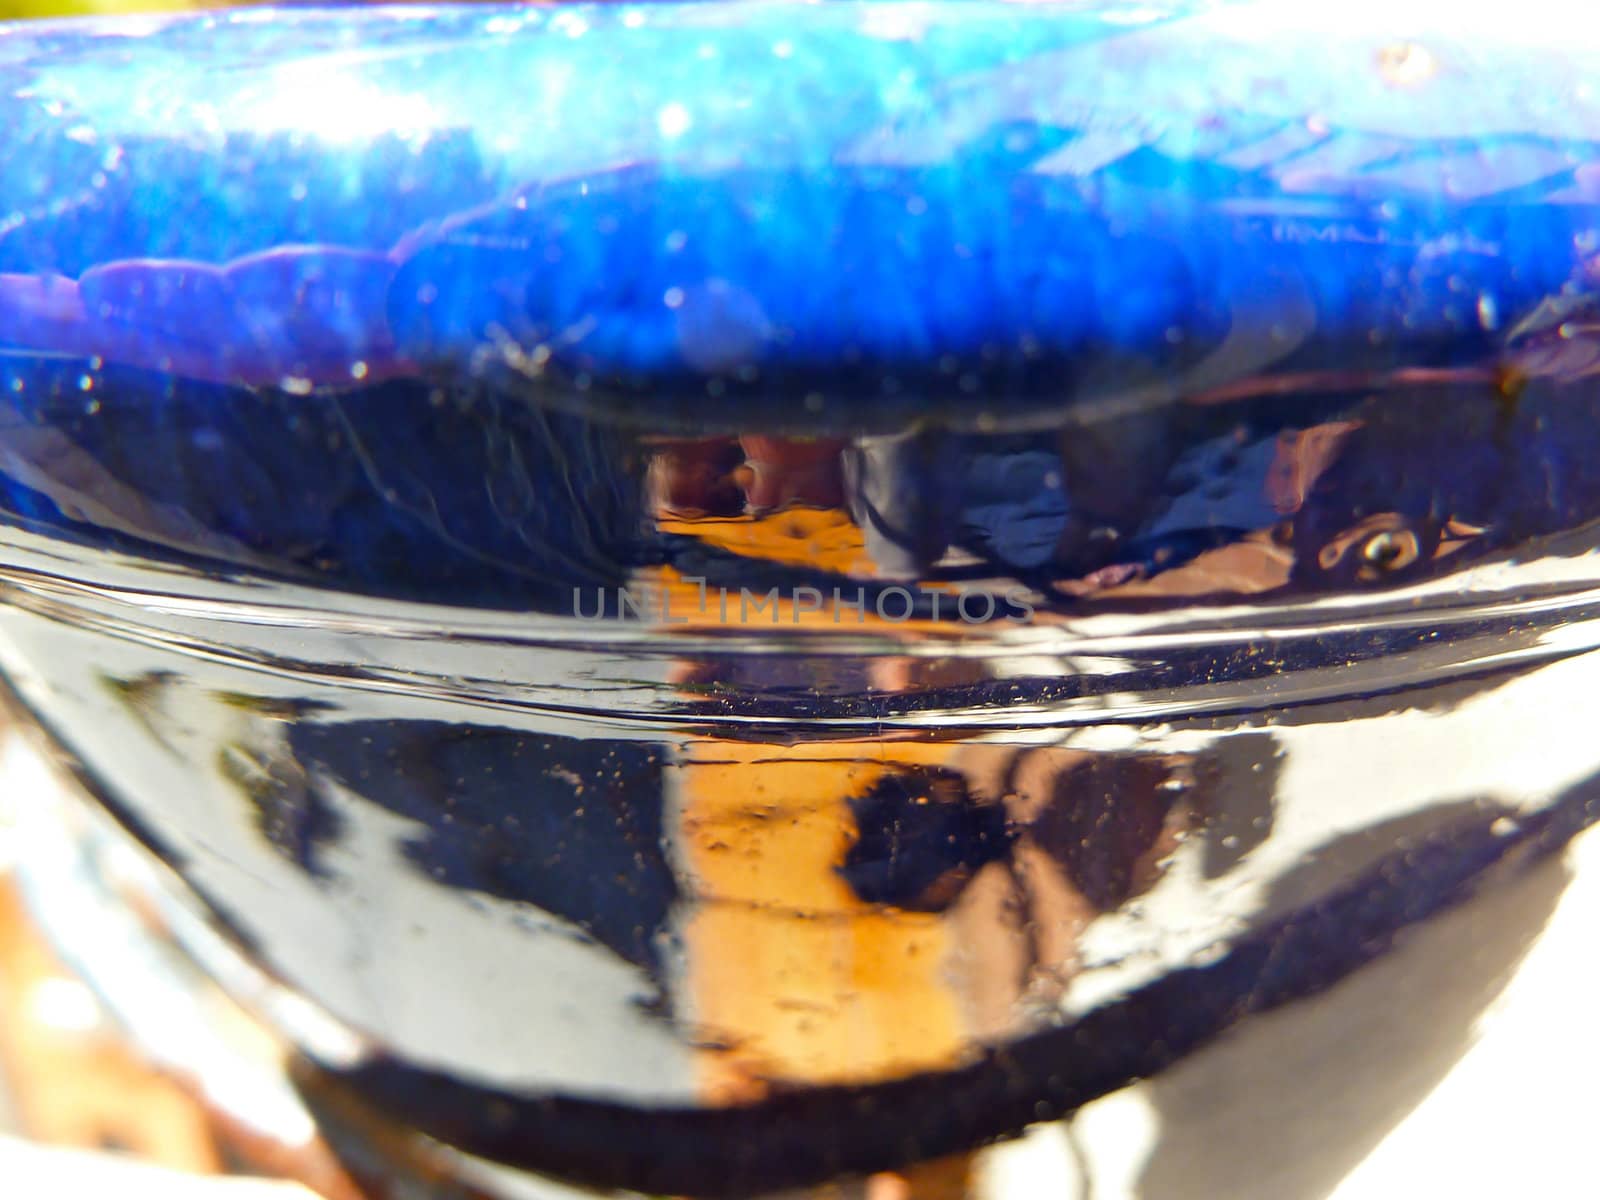 unusual reflections in some blue ceramic